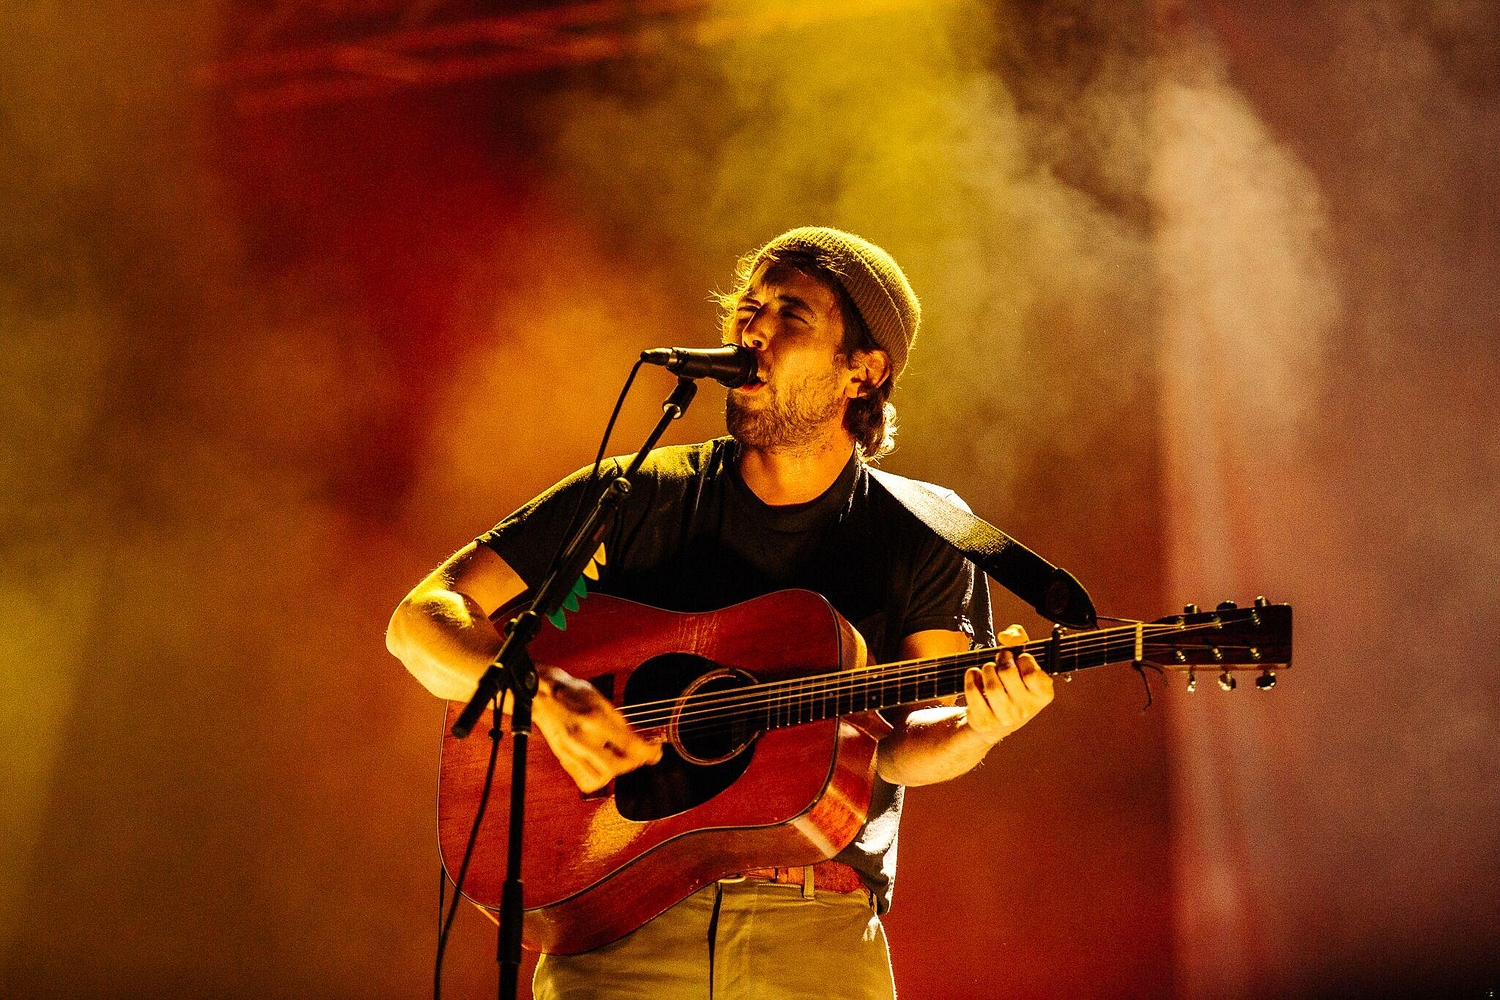 Fleet Foxes announce boxset ‘First Collection 2006 – 2009’, including B-sides and Rarities